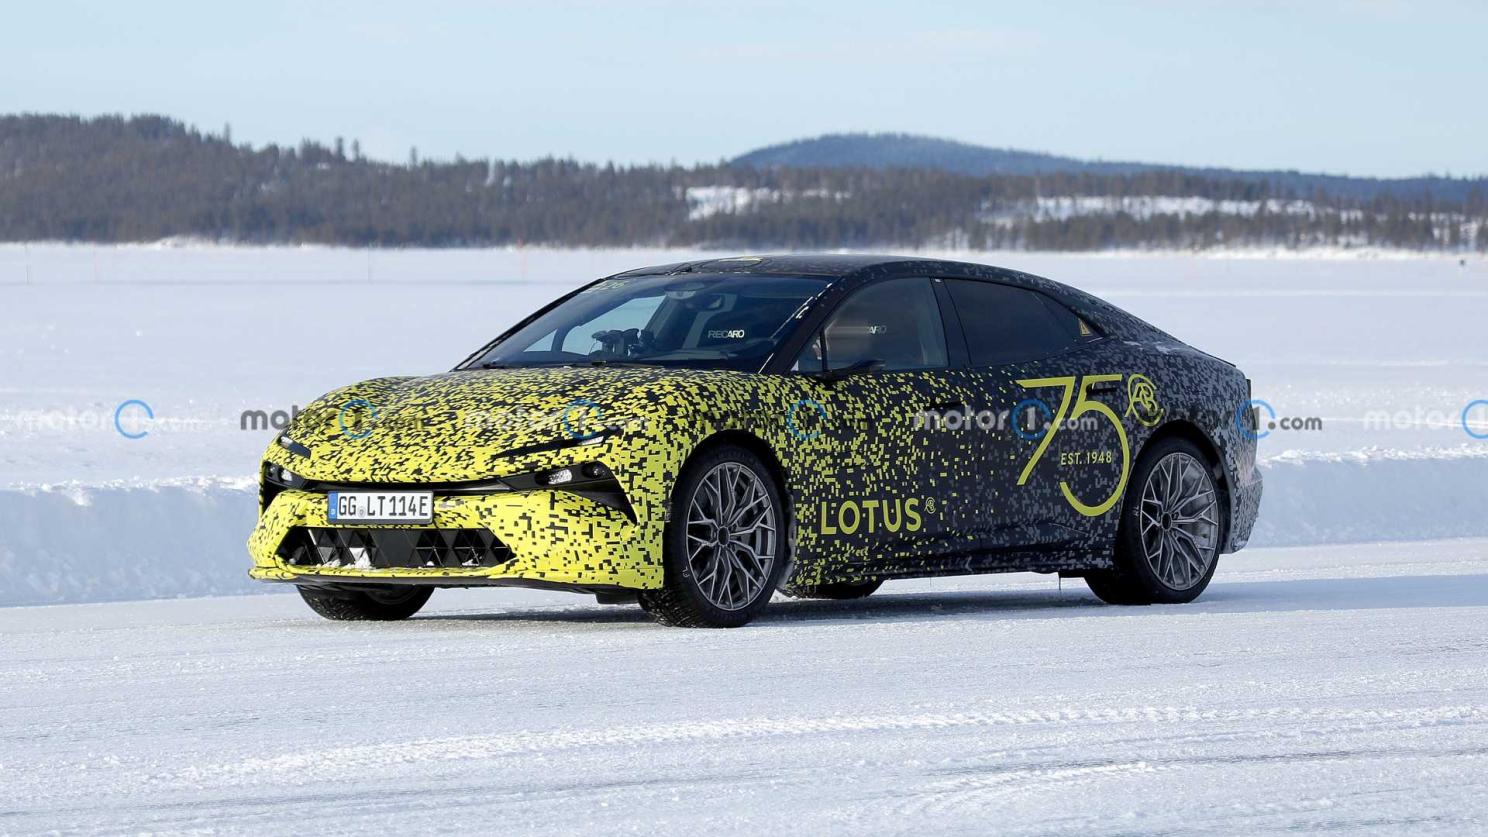 New spy shots of the Lotus Type 133, a brand-new all-electric sedan, have been leaked.